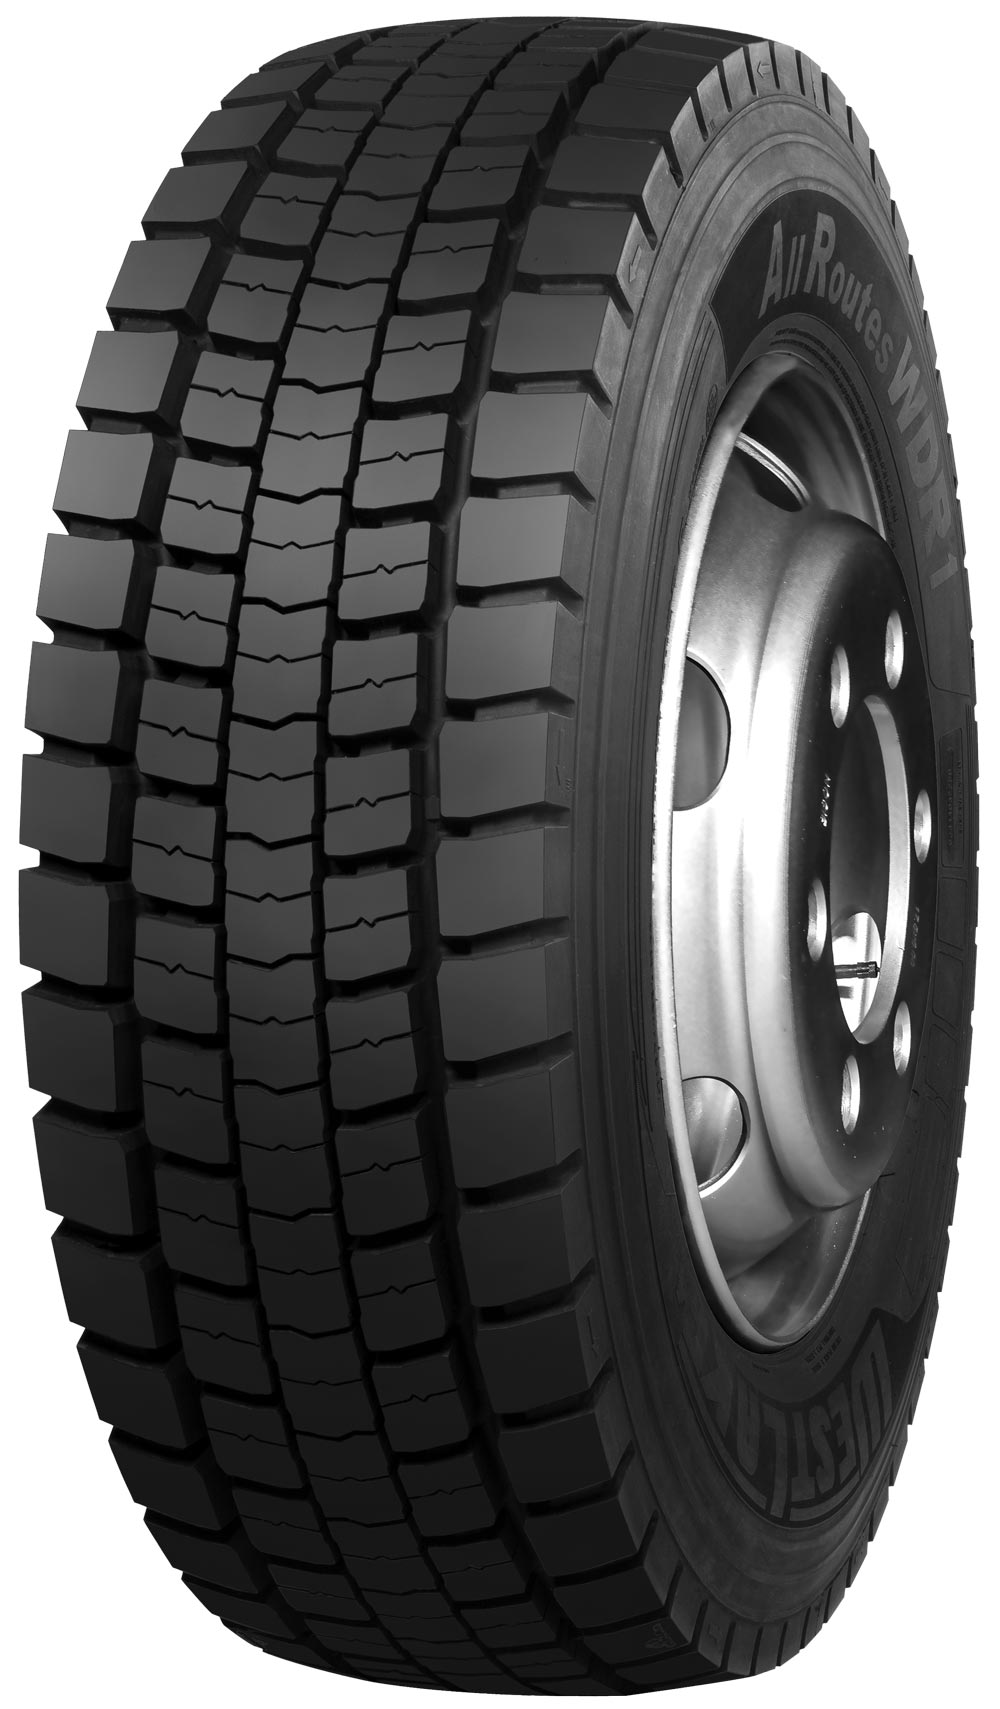 product_type-heavy_tires WESTLAKE WDR1 18PR 315/80 R22.5 156L